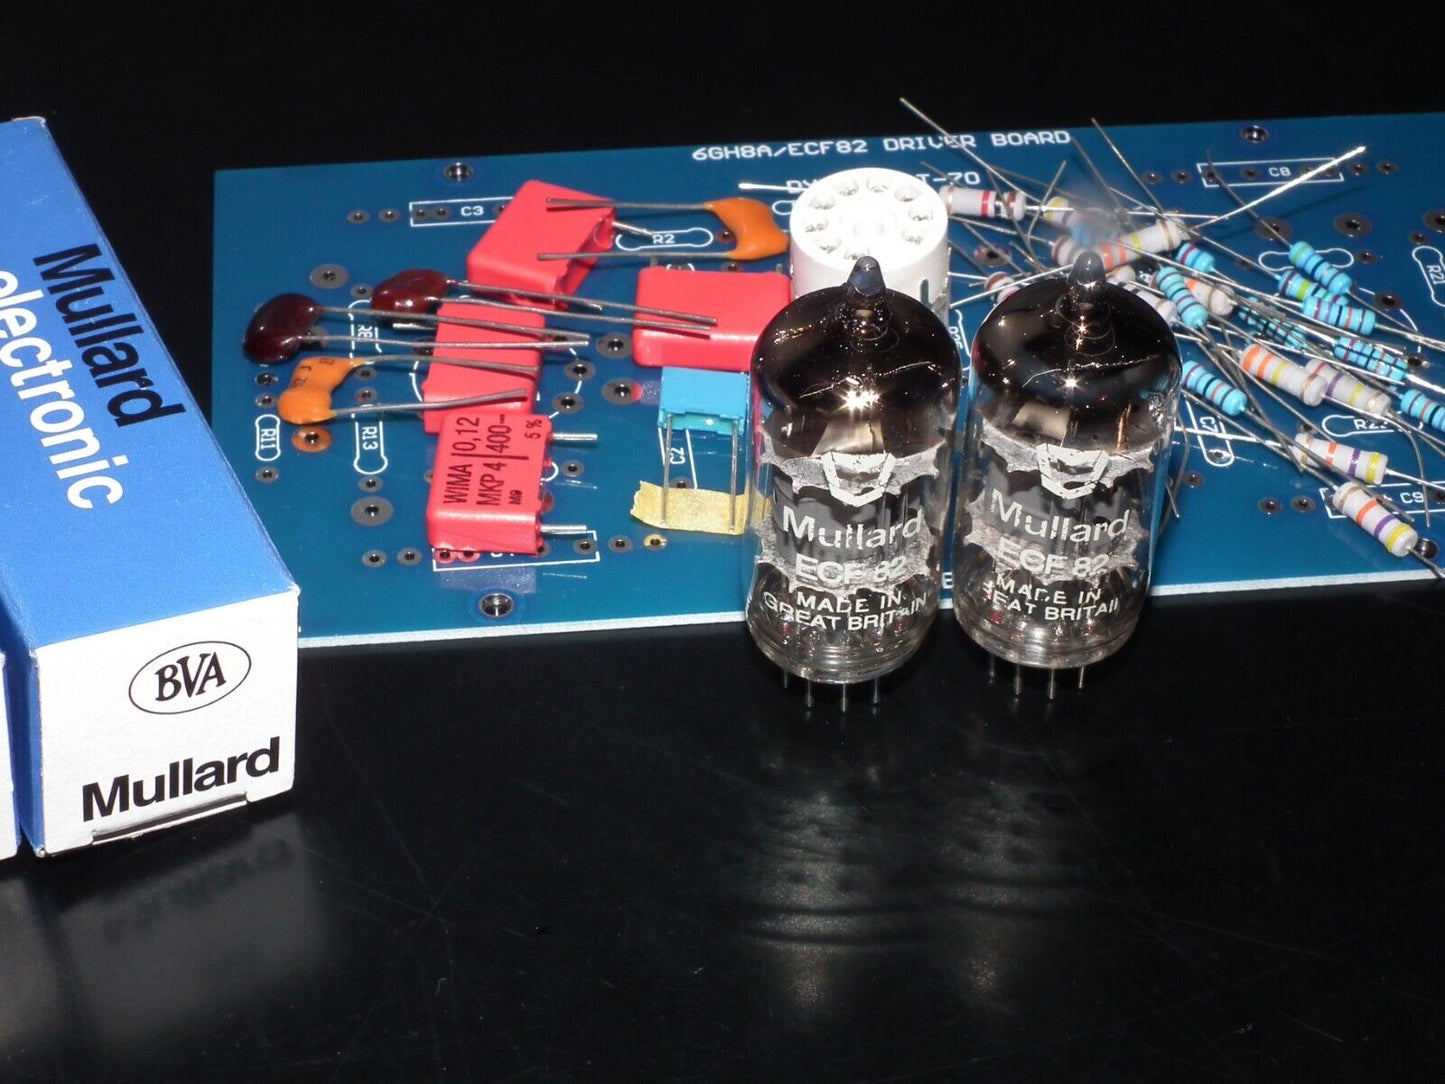 DYNACO ST-70 6GH8A / 6GH8 COMPLETE KIT PC-3 DRIVER BOARD WITH TUBES (NOS Platinum matched pair of 6GH8A ECF82 Mullard Made in Great Britain)